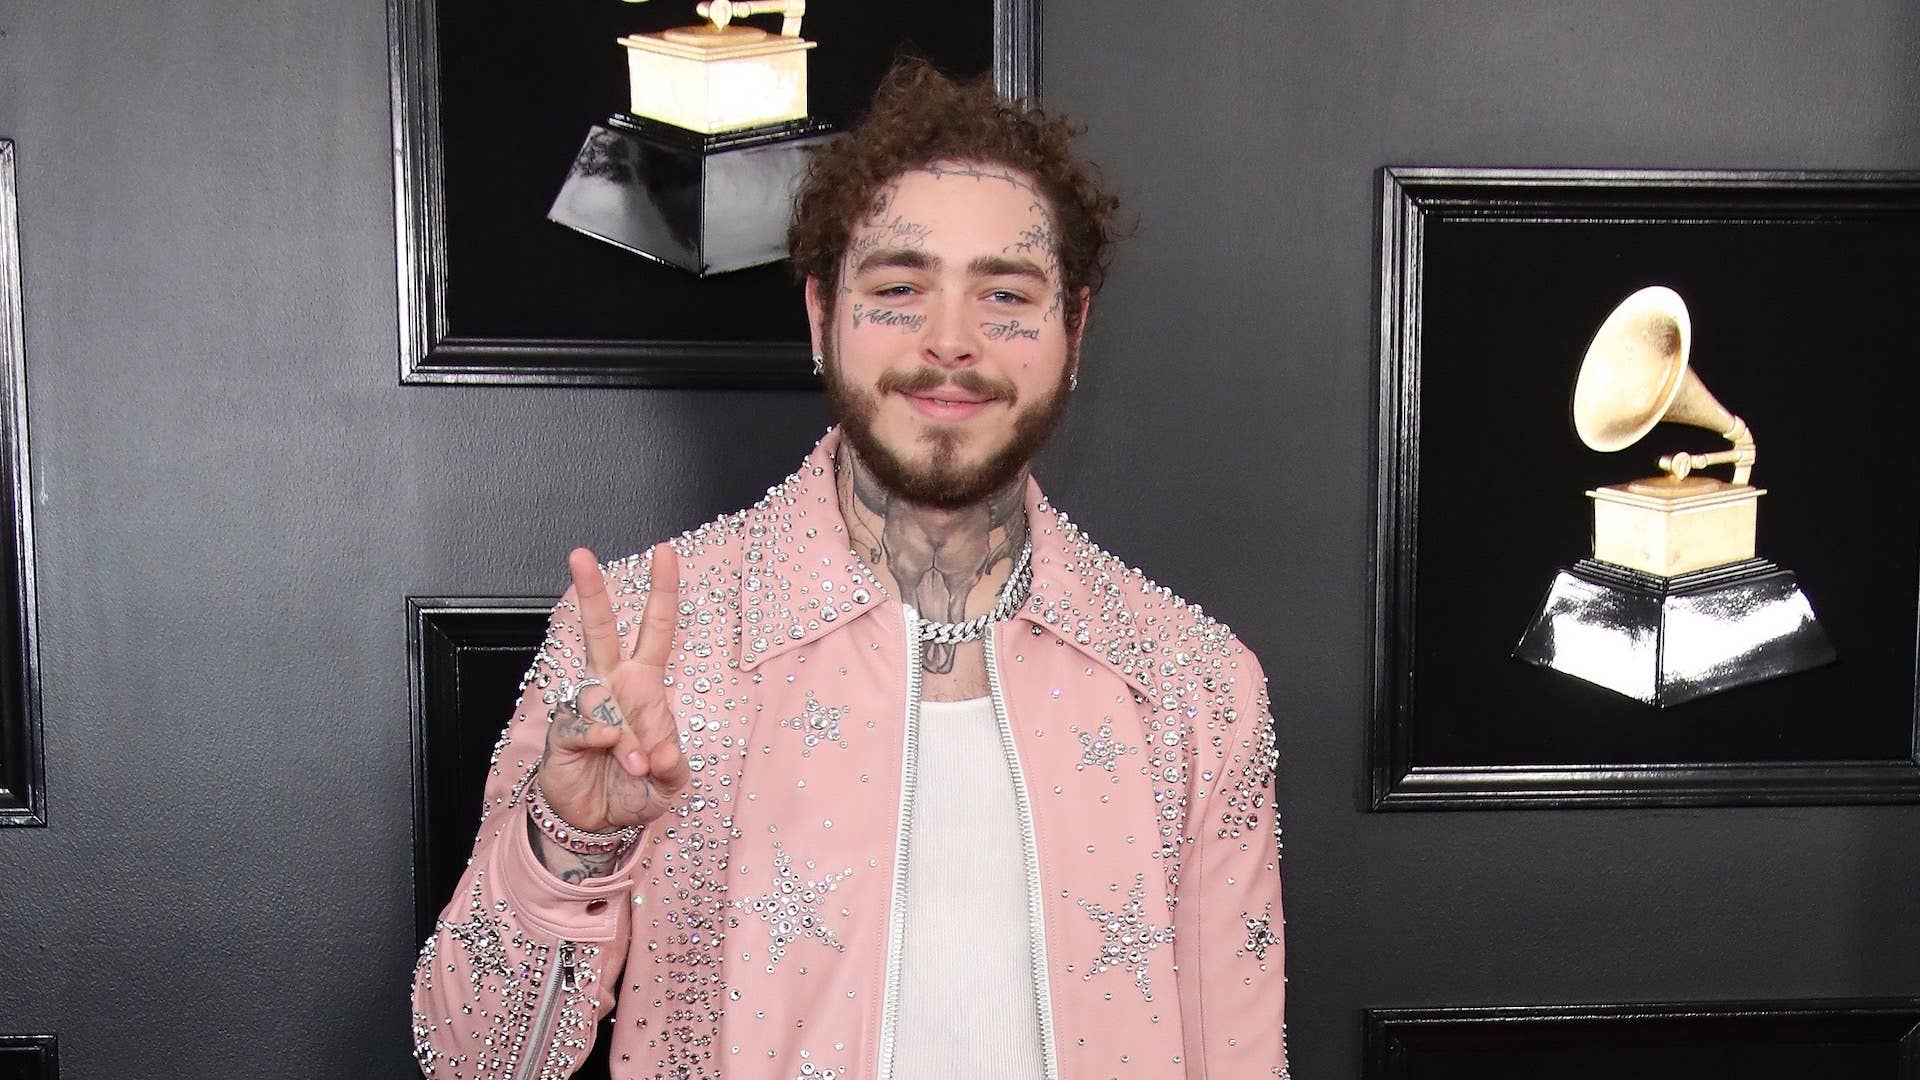 Post Malone Announces Virtual Beer Pong Tournament With Celebrity Friends